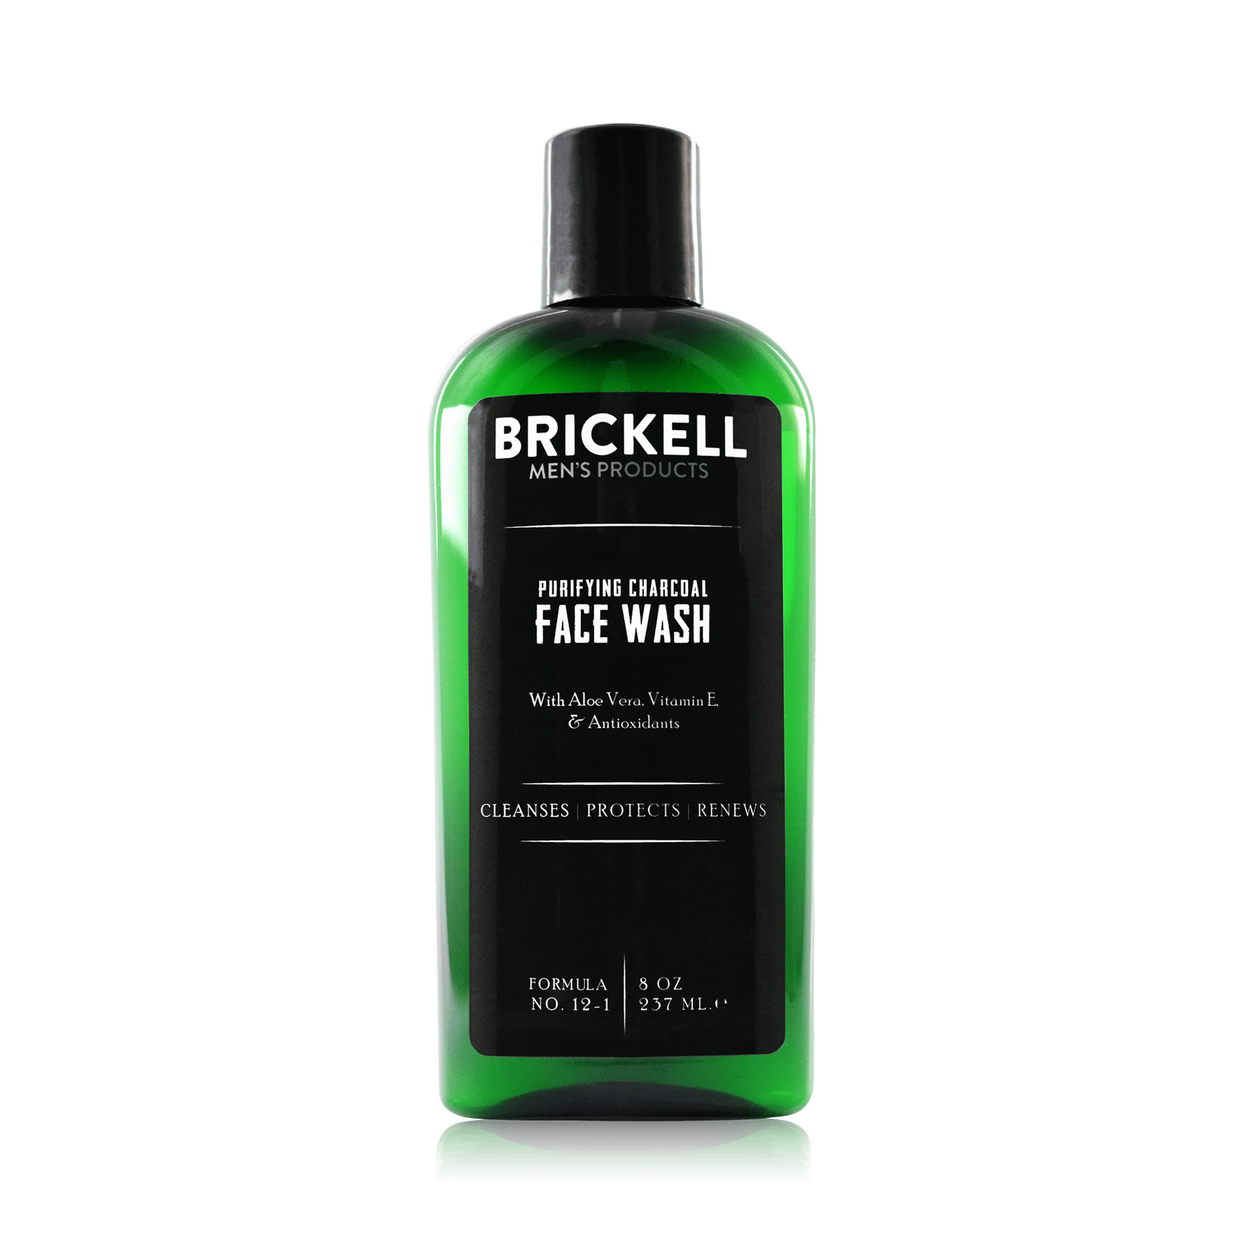 Purifying Charcoal Face Wash